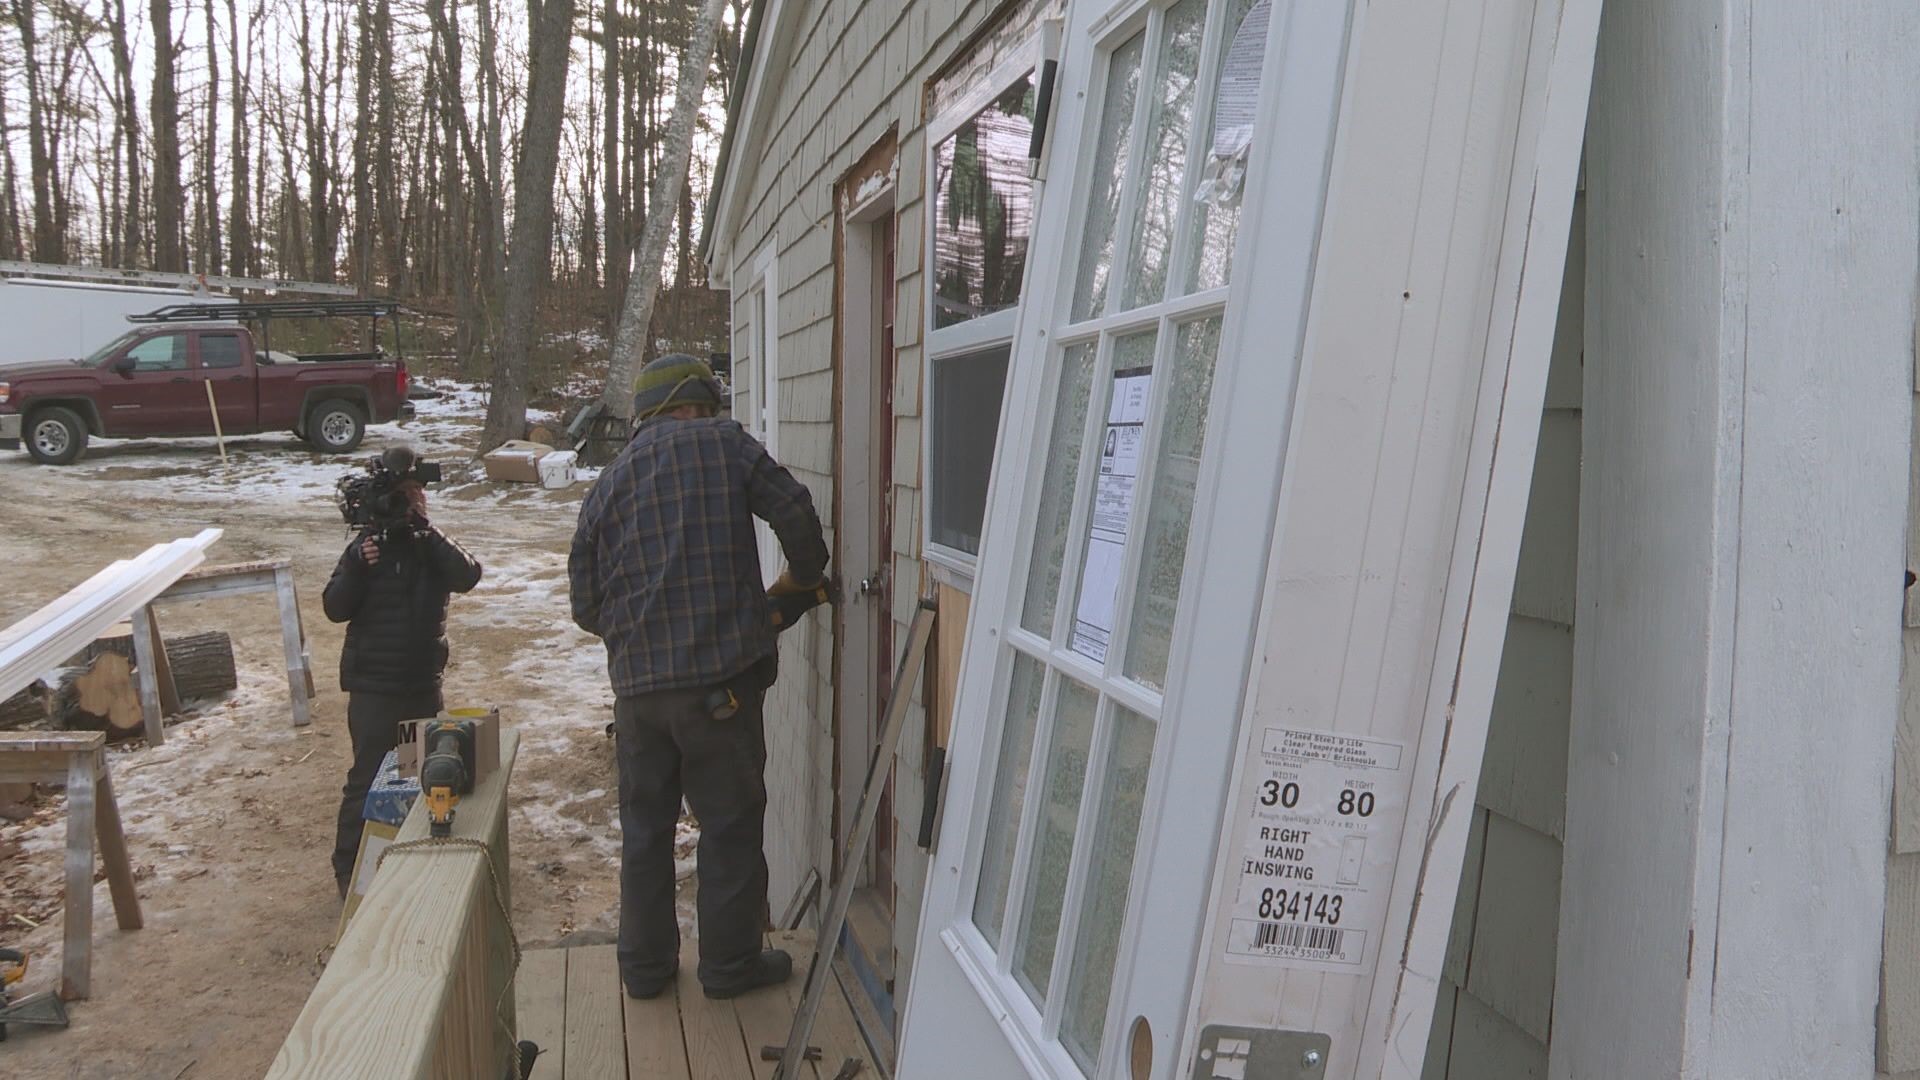 DIY's Maine Cabin Masters gives an closeup and personal look at rebuilding camps, Maine style